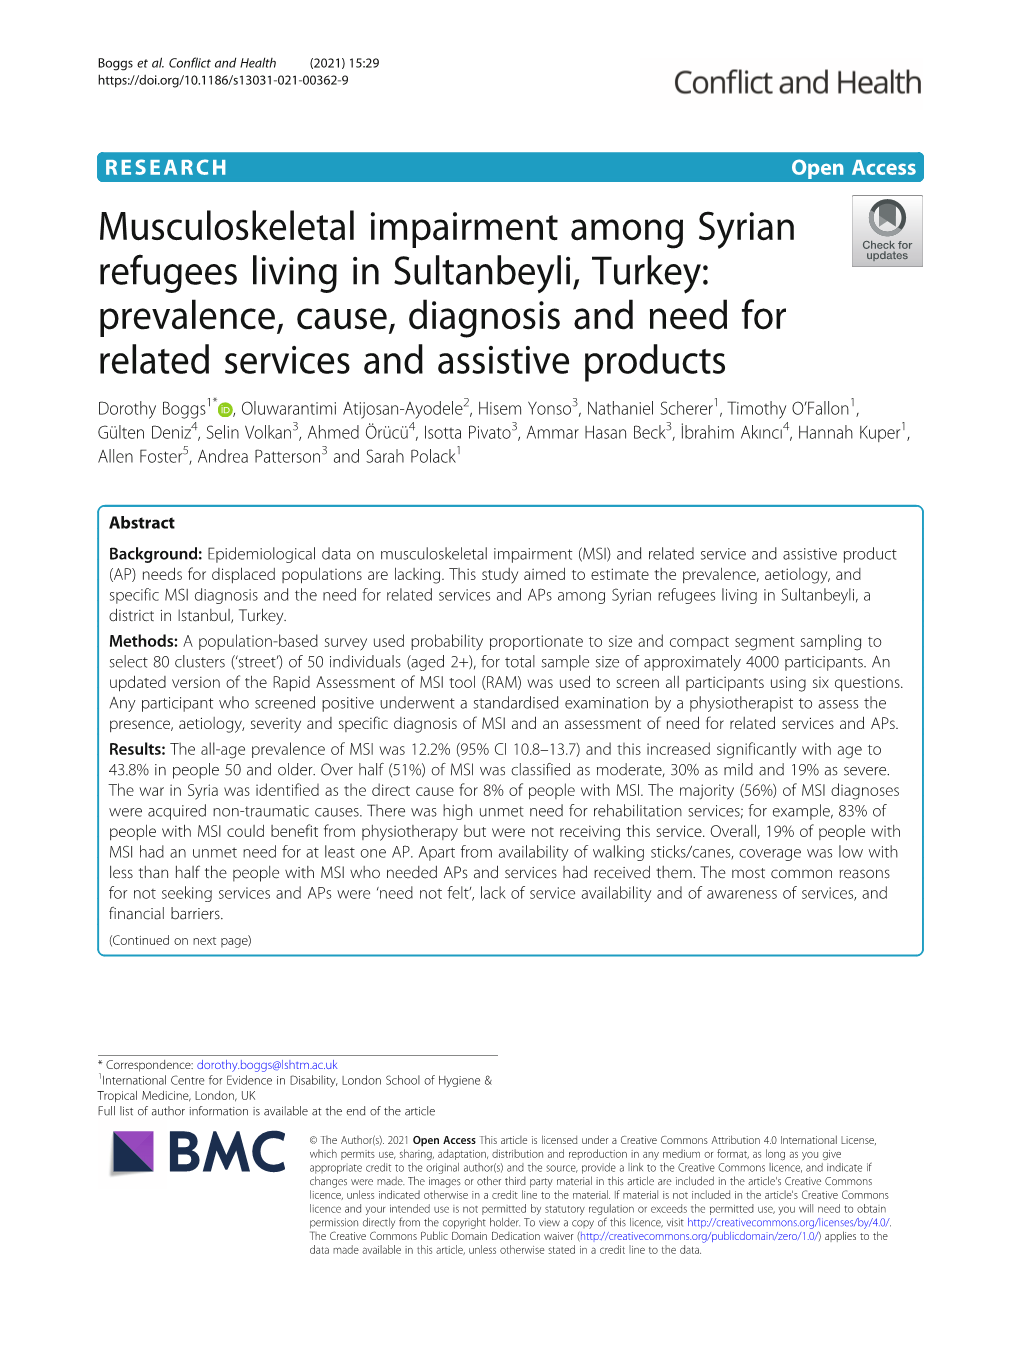 Musculoskeletal Impairment Among Syrian Refugees Living in Sultanbeyli